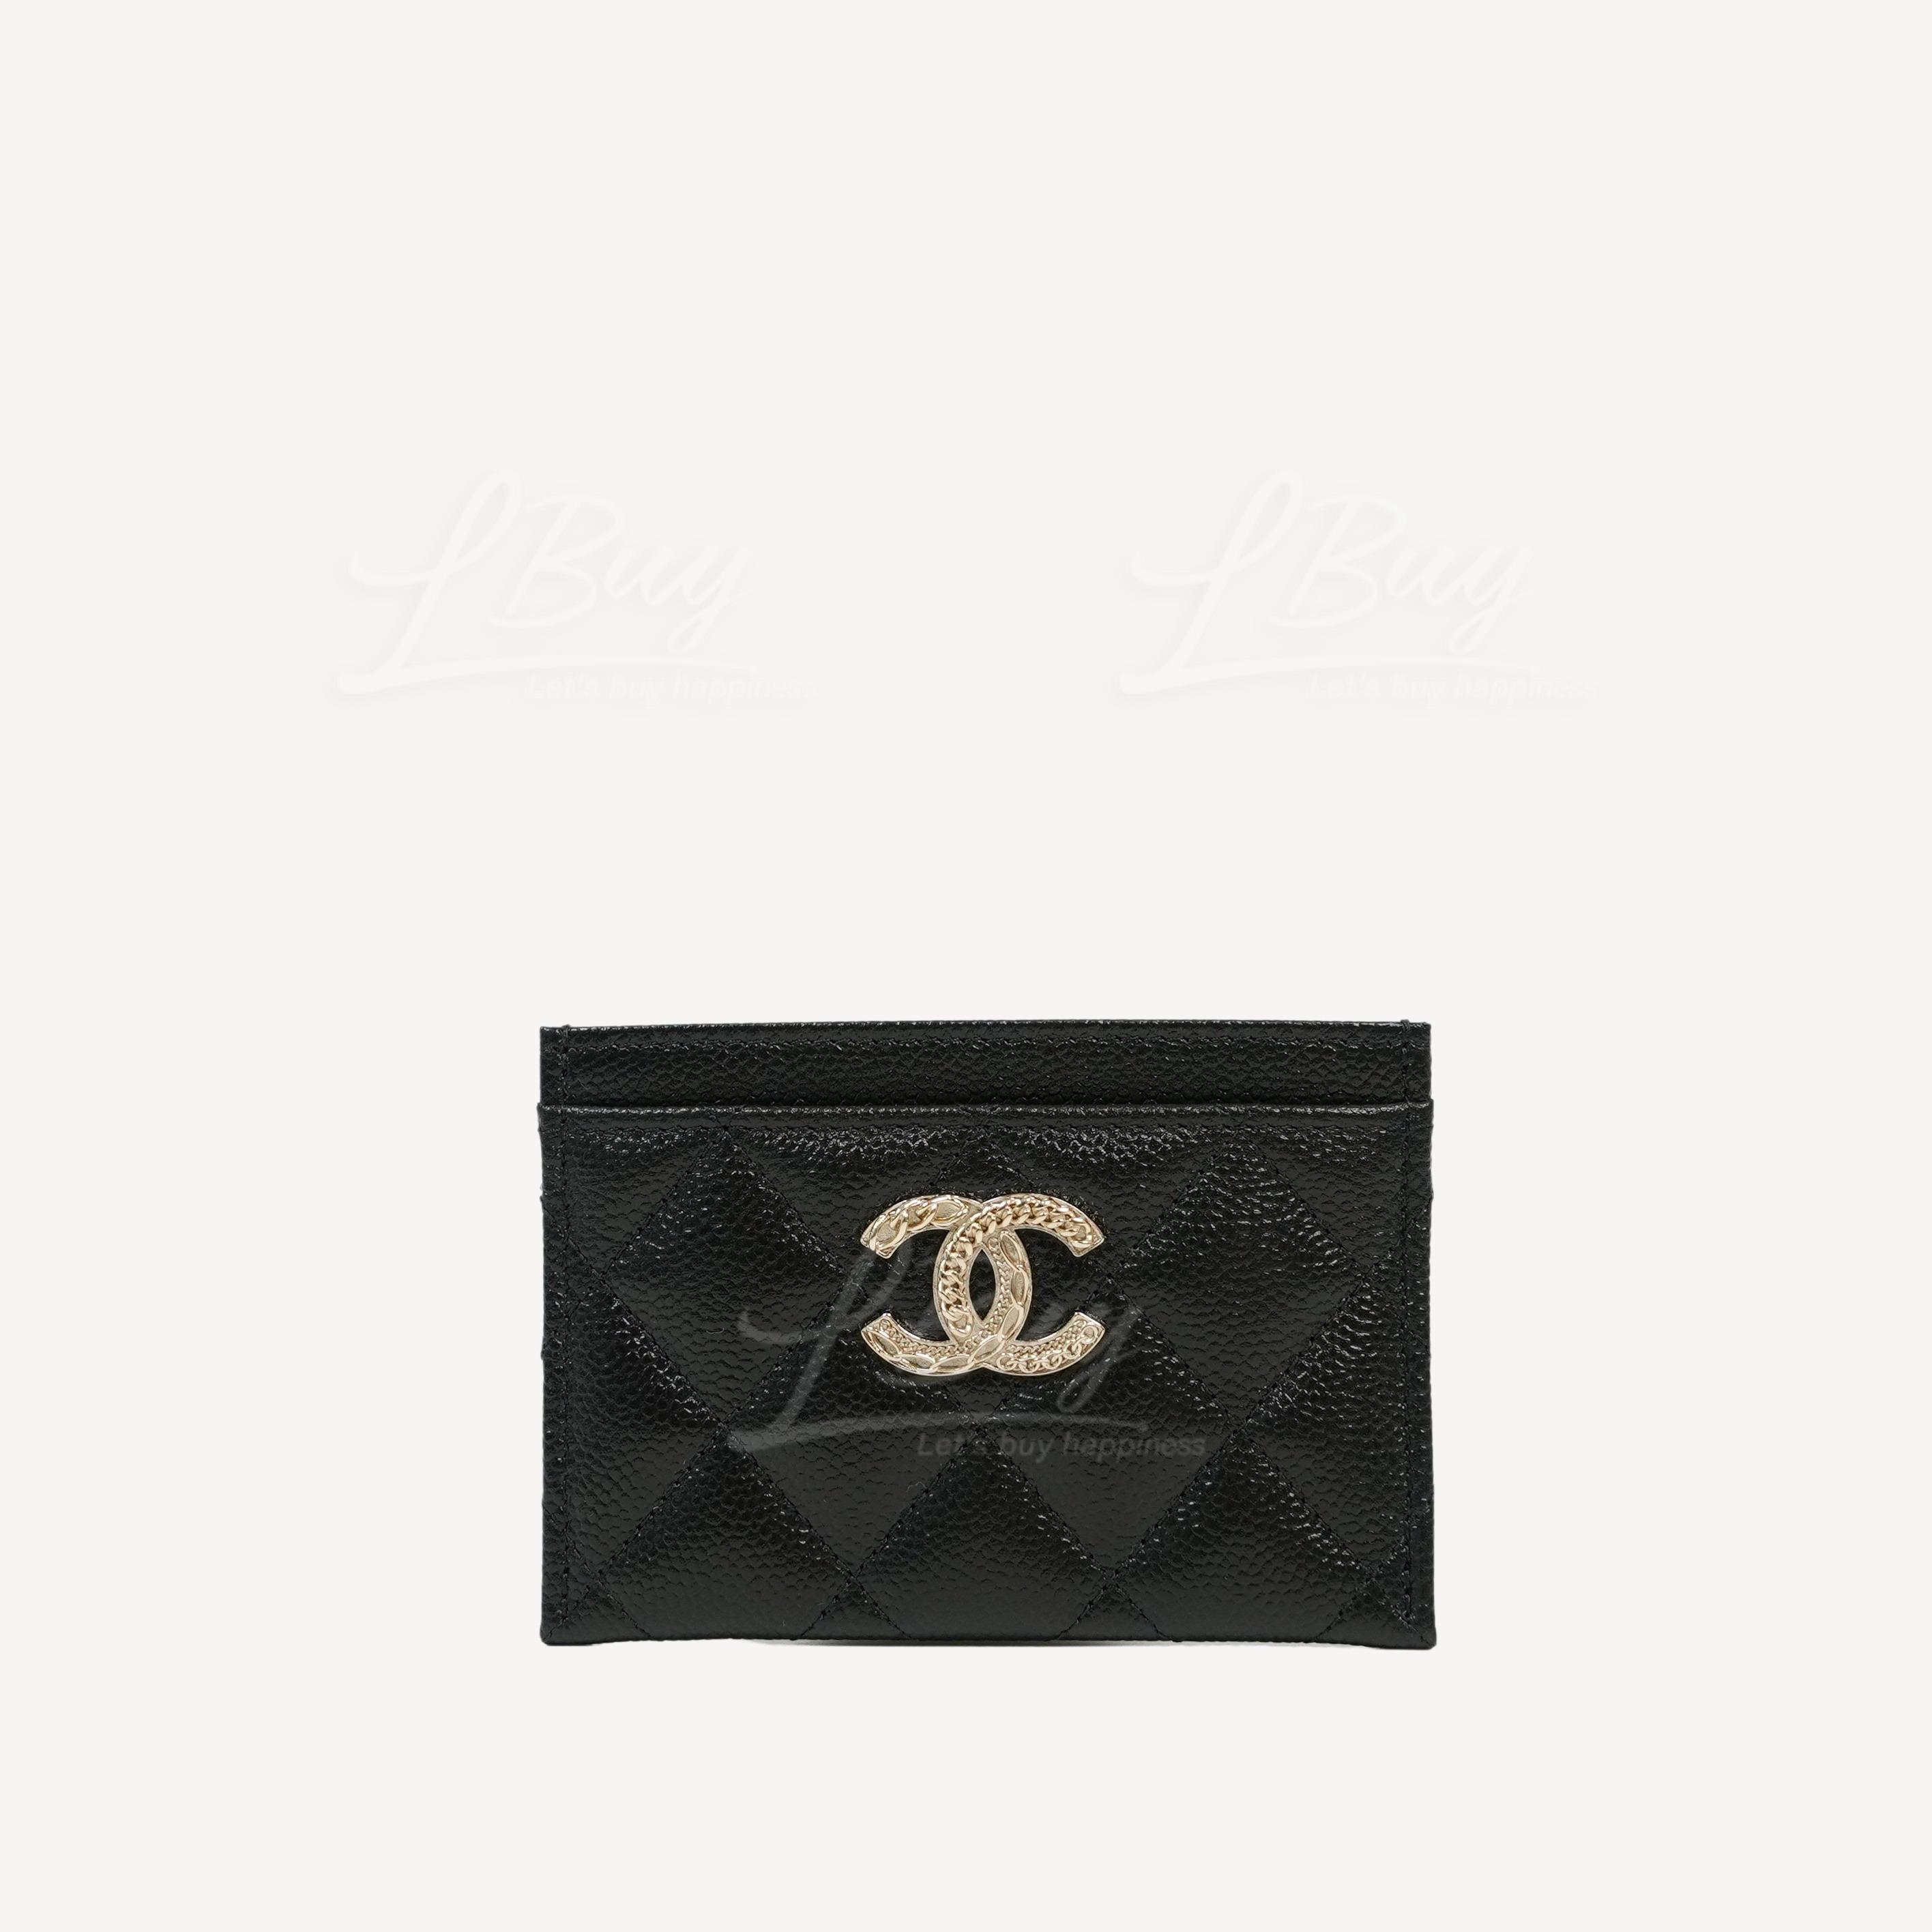 Chanel Classic CC Credit Card Case in Black Caviar Leather with Gold  Hardware  SOLD